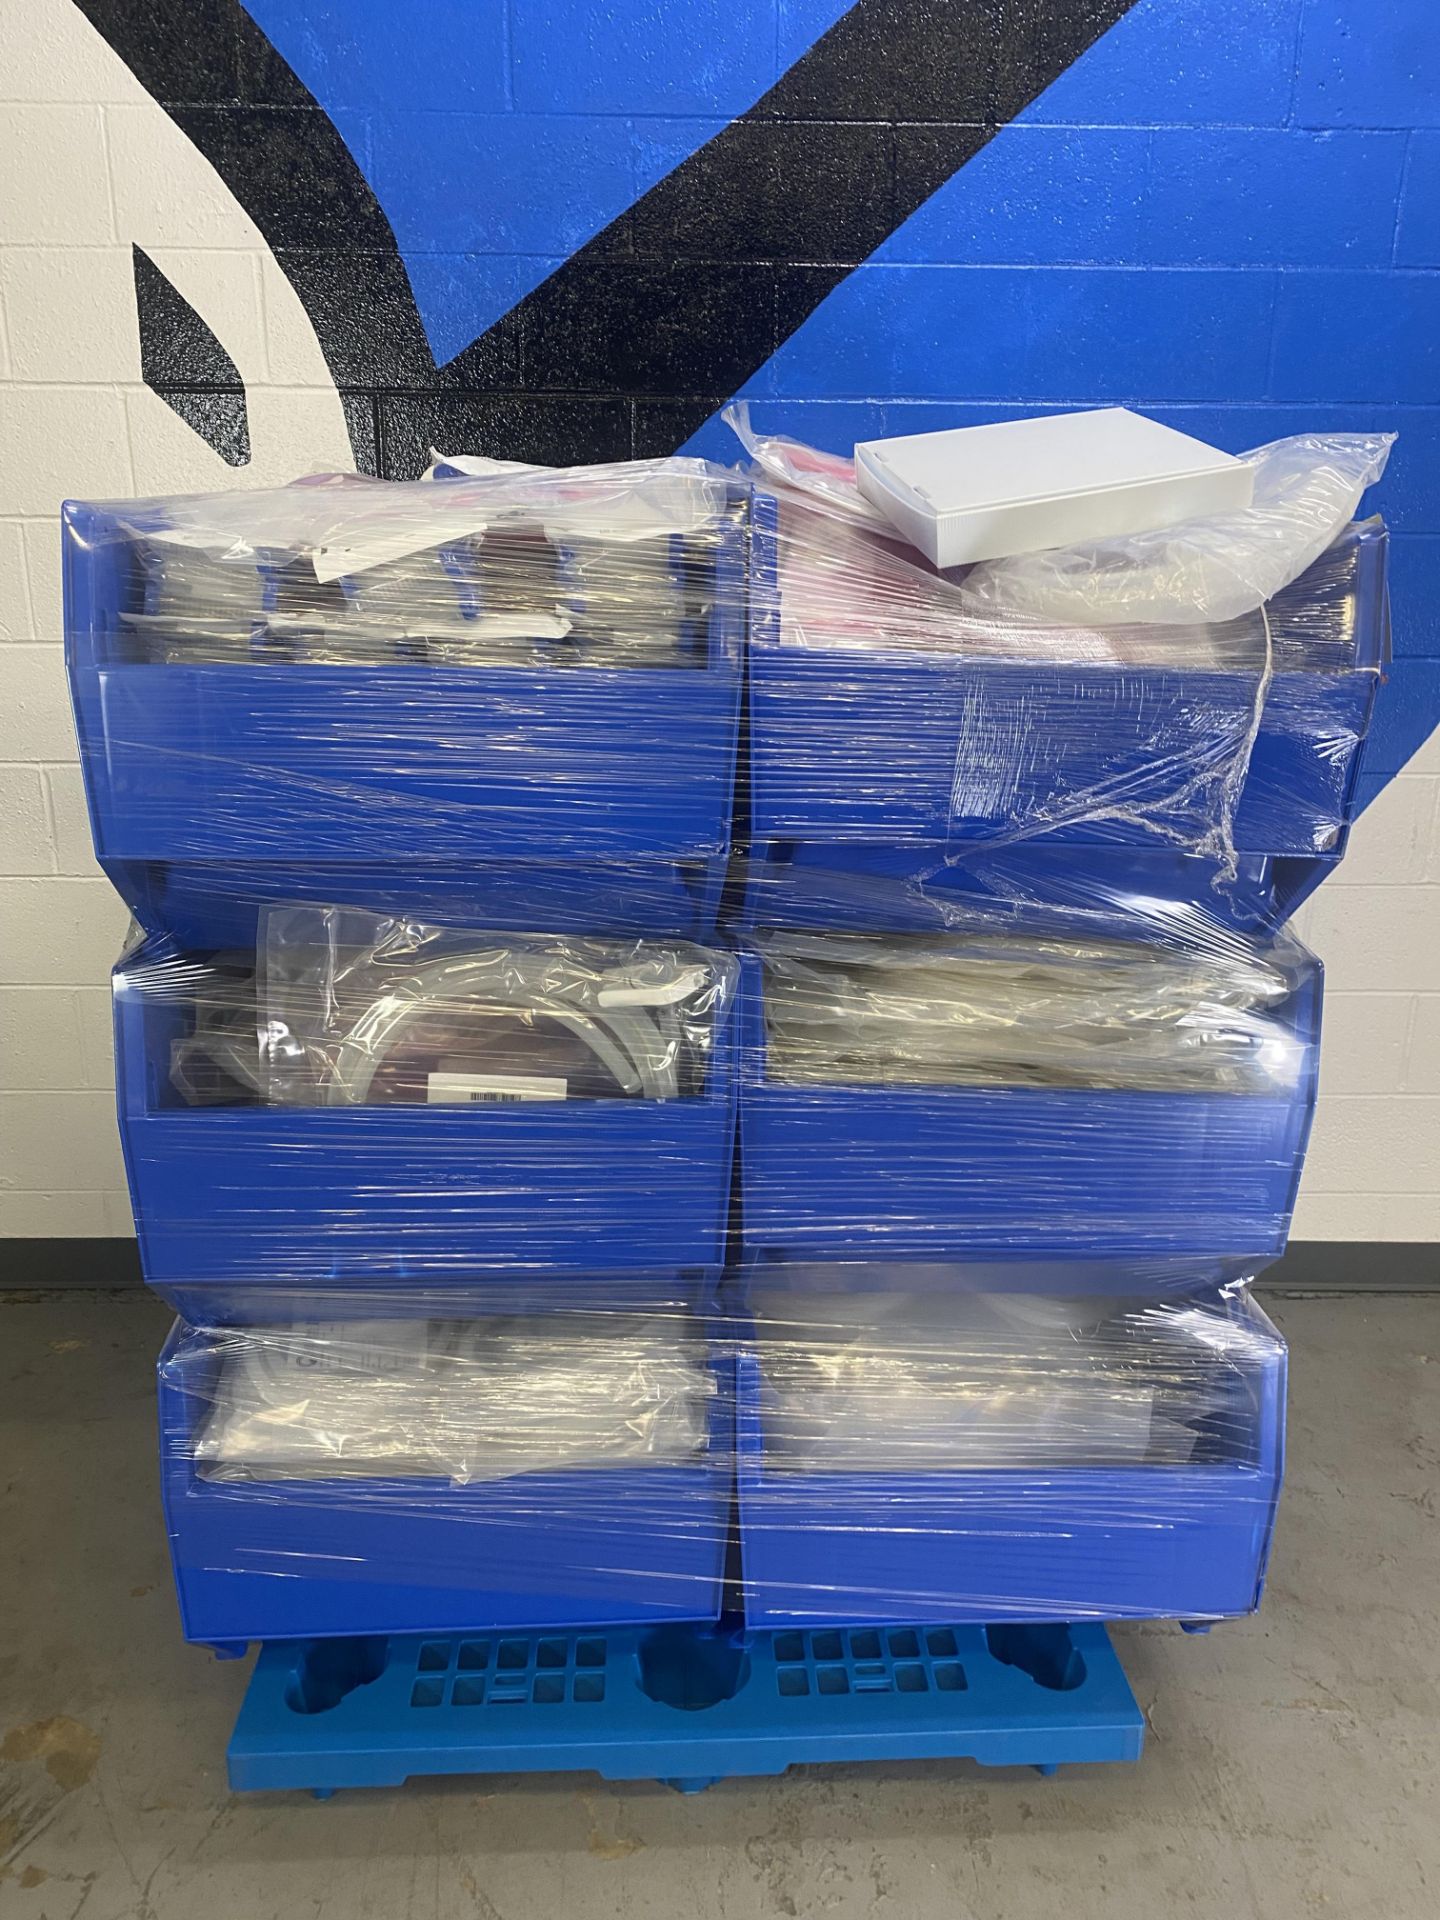 {LOT} Of Consumables on Pallet of Approx. 6 Boxes c/o: Fisherbrand Disposable Centrifuge Tubes